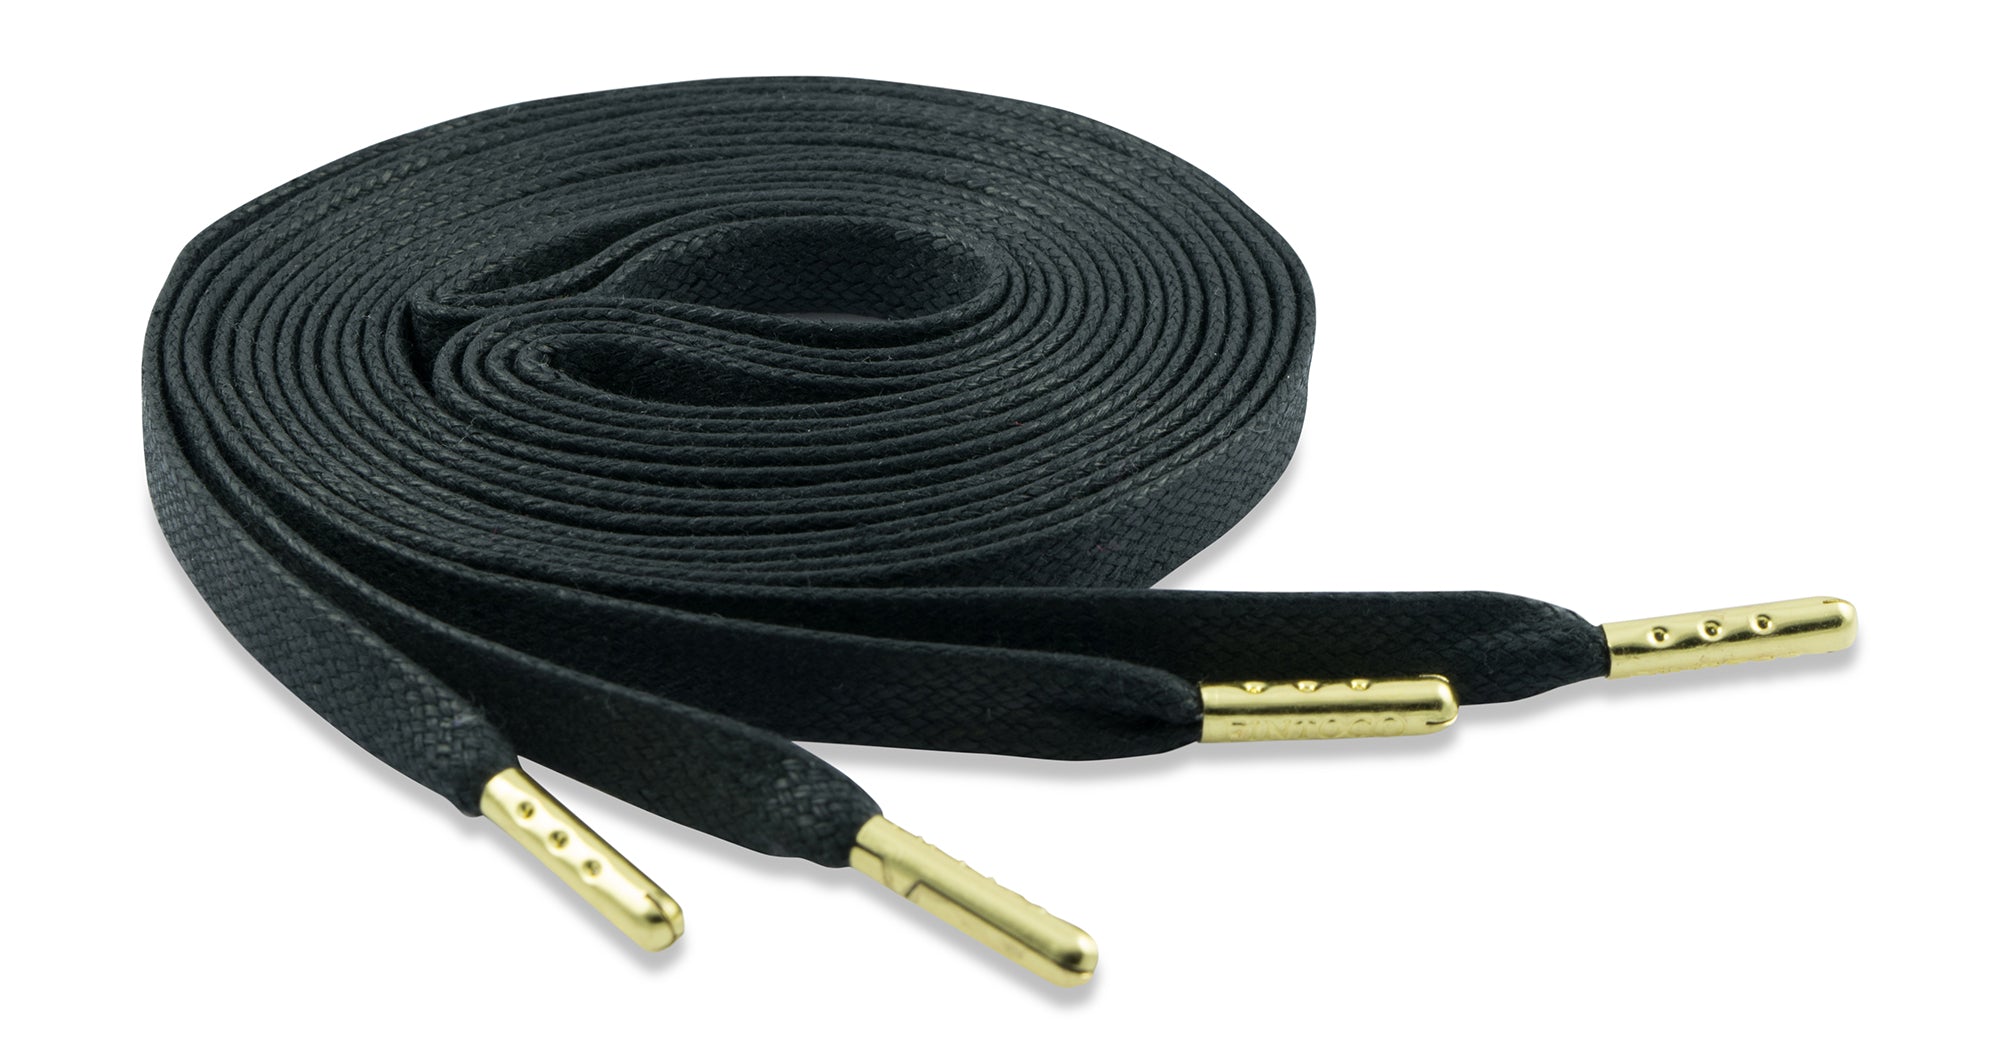 Flat Waxed Athletic Shoelaces - Black with Gold Tips